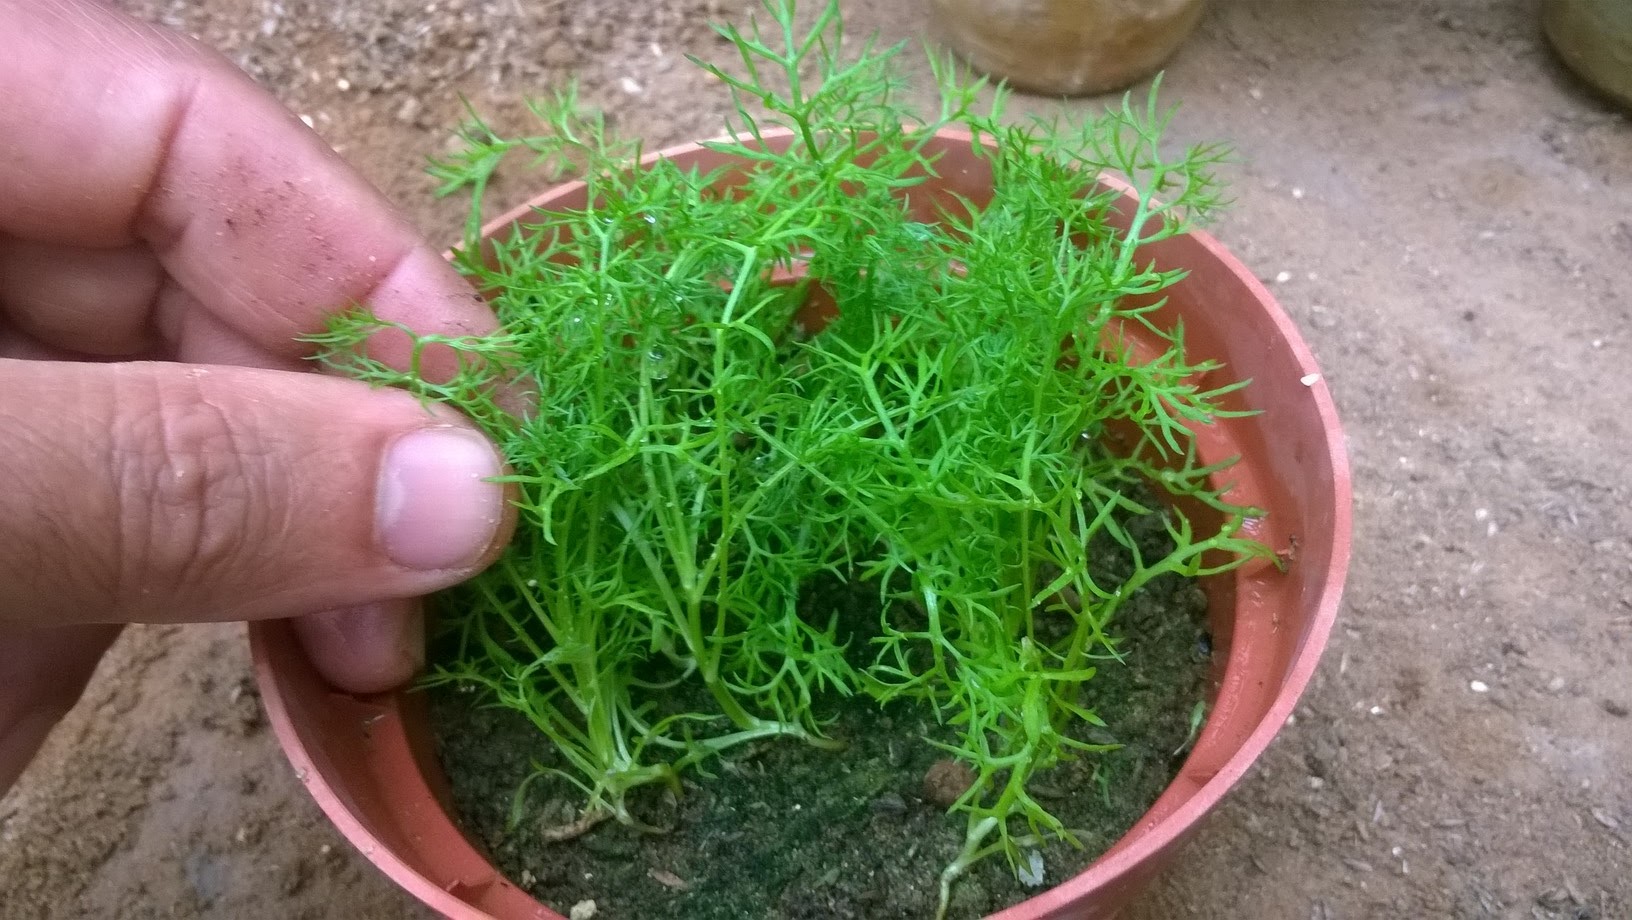 Keep them moist, and transplant  the seedlings when they are large enough to handle into 7.5-10cm (3-4in) pots. Chamomile seedlings should be kept in a sunny spot until its time to transplant them.